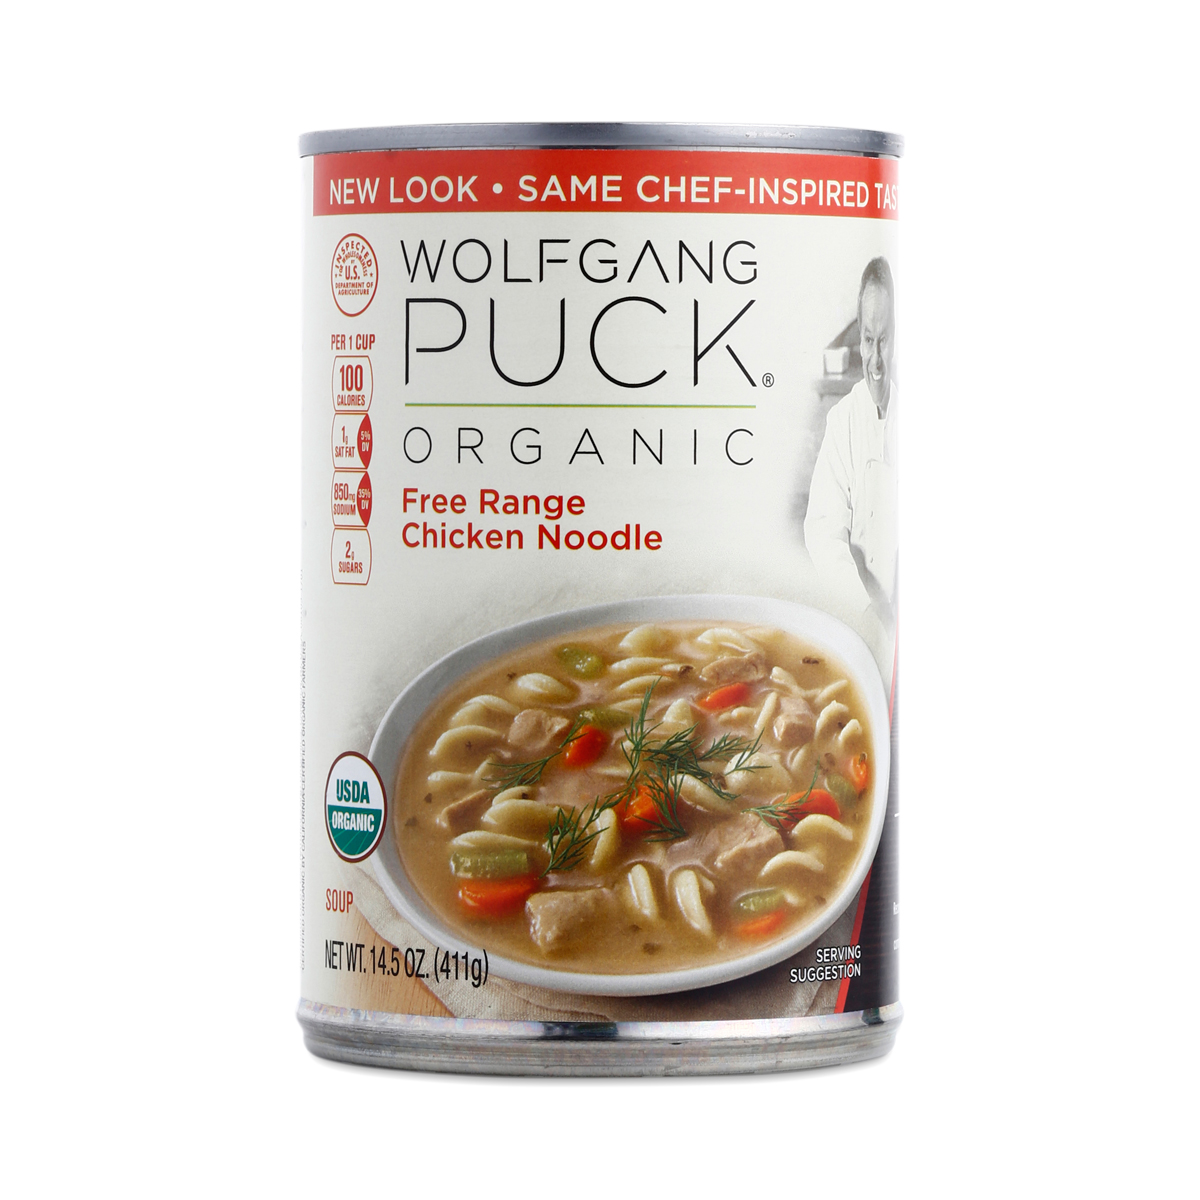 Wolfgang Puck Organic, Free Range Chicken Noodle Soup 14.5 oz can